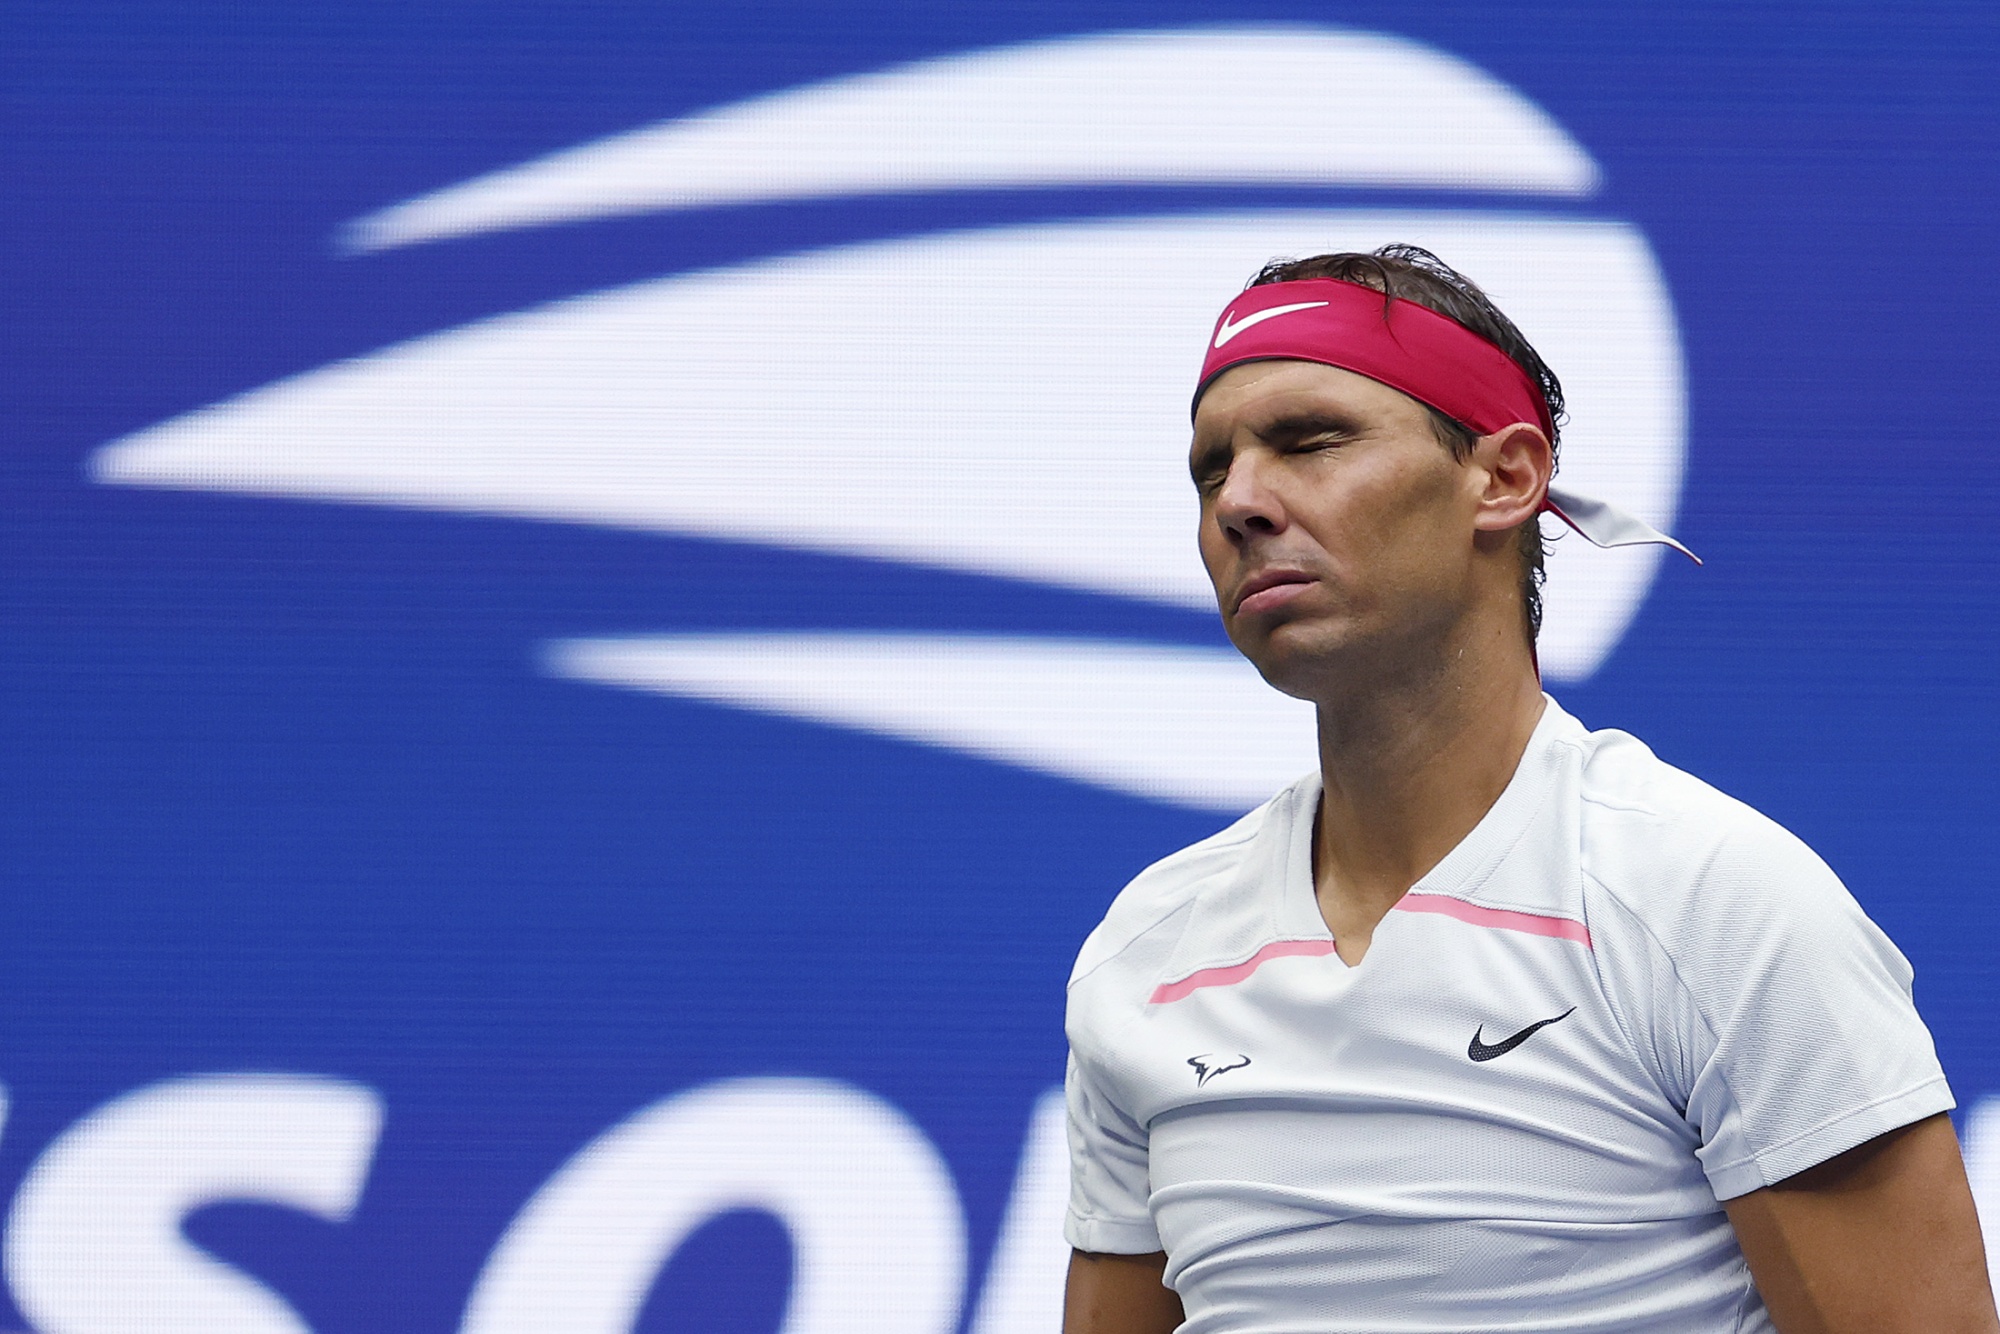 US Open Rafael Nadal 22-Match Slam Streak Ended by Frances Tiafoe in 4th Round